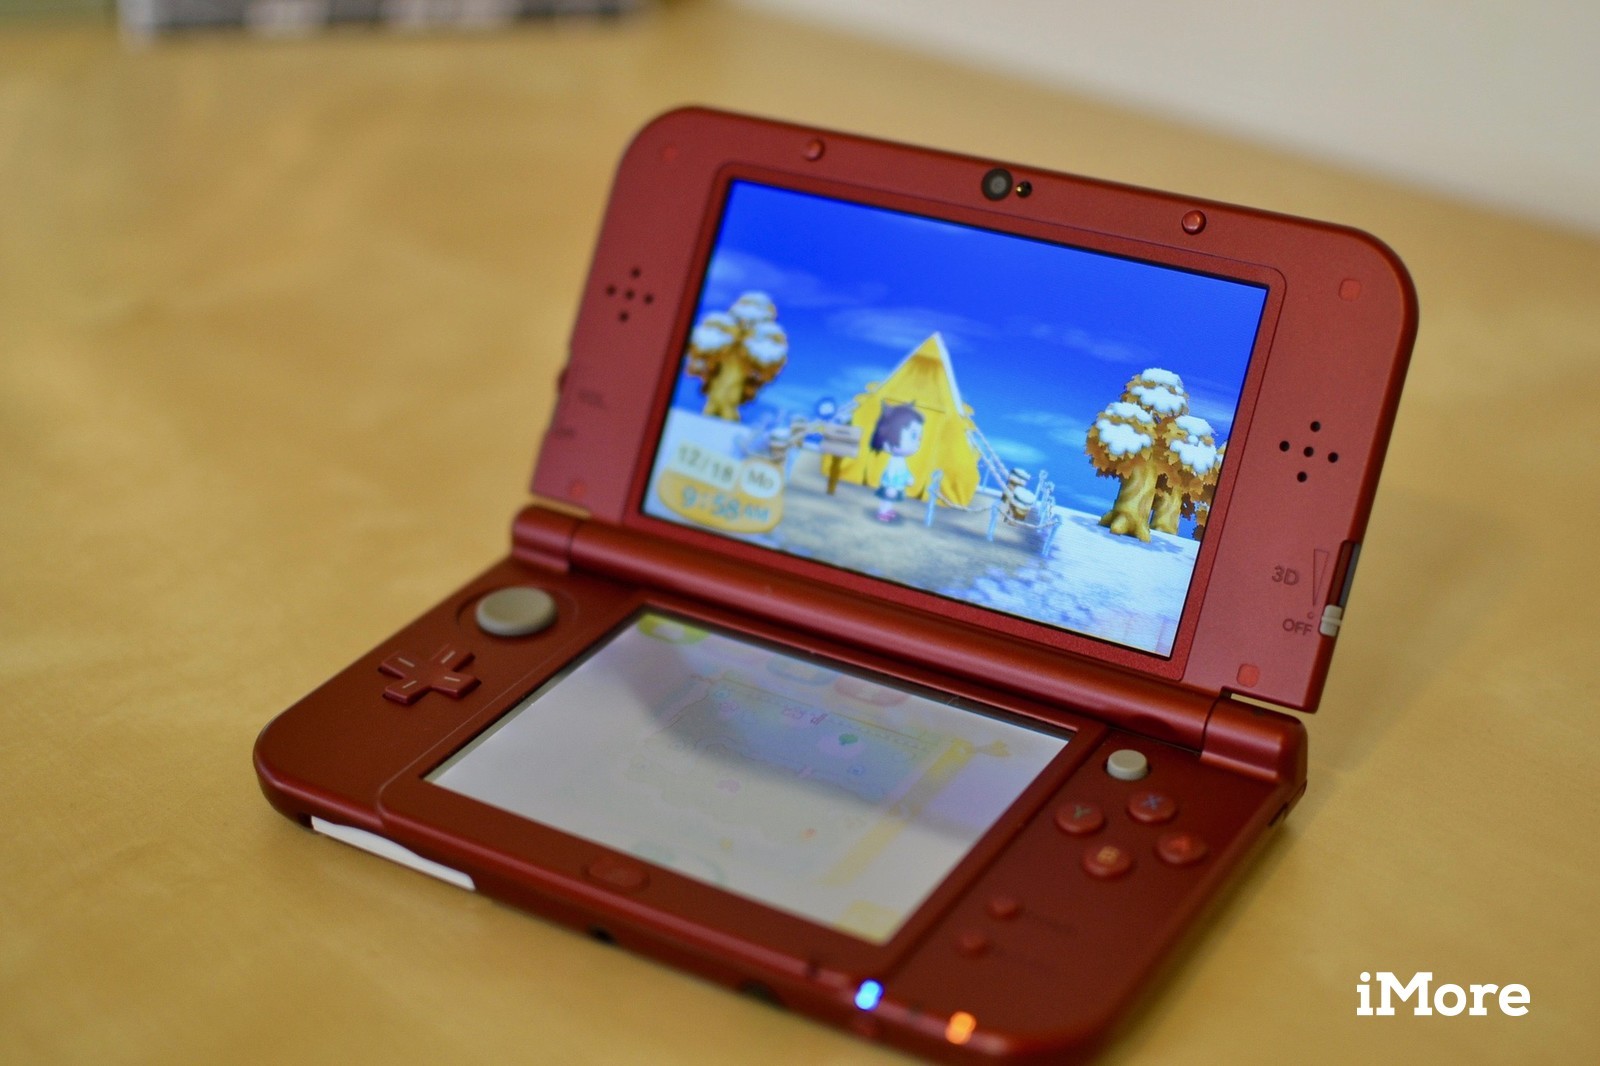 nds to 3ds